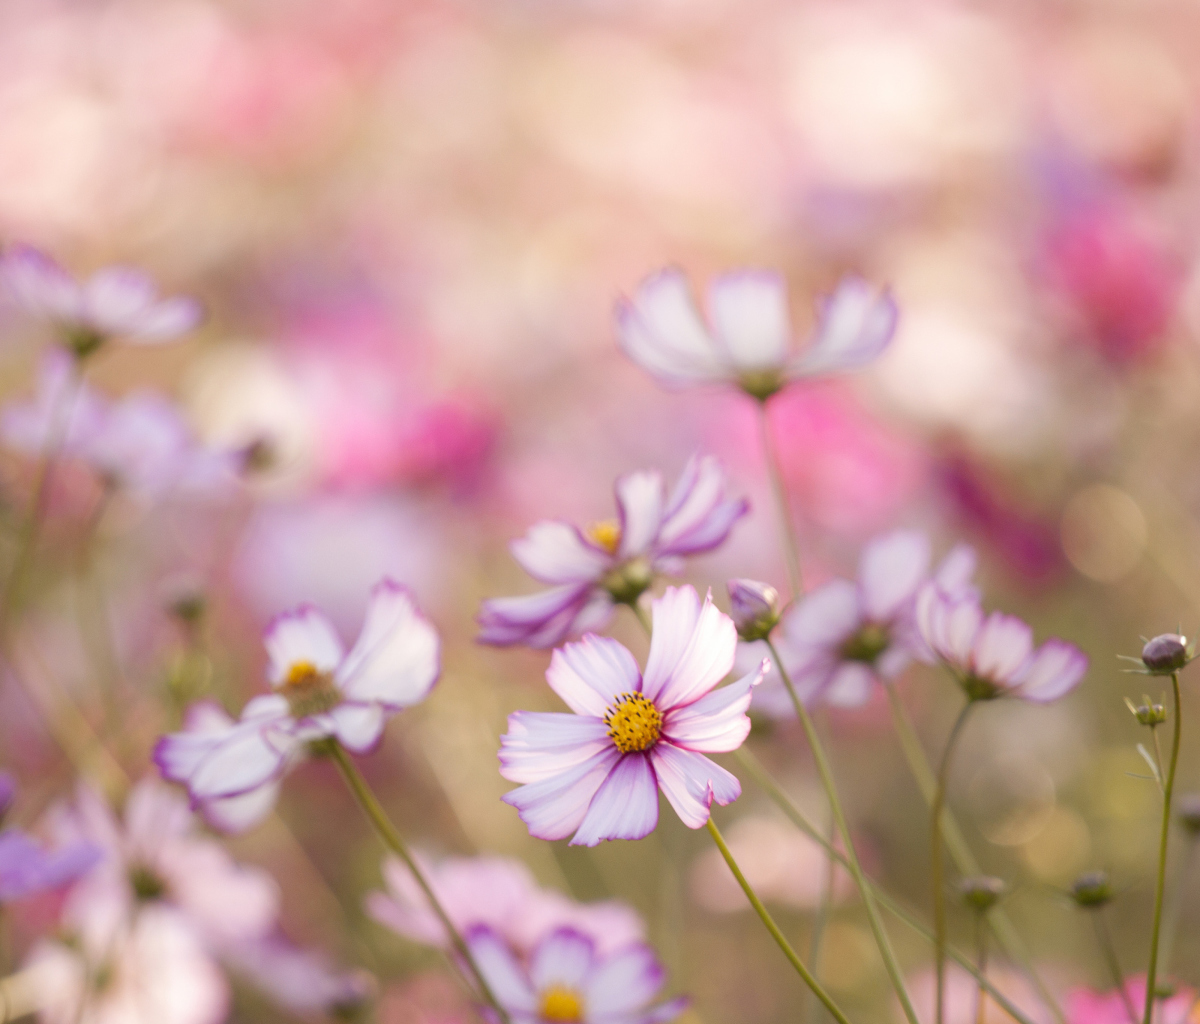 Field Of White And Pink Petals wallpaper 1200x1024